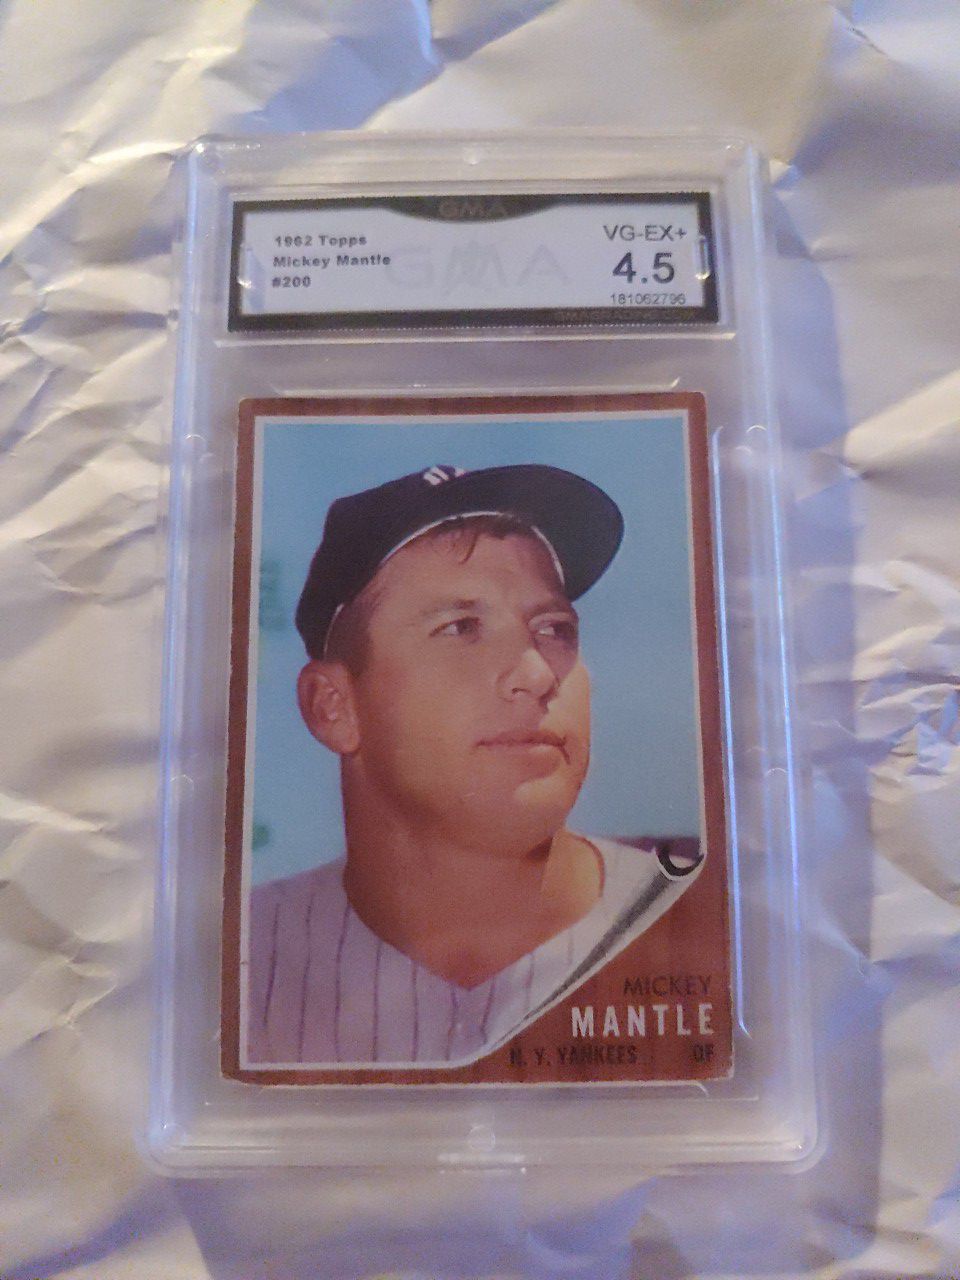 1962 Topps Mickey Mantle GMA 4.5 VG-EX+ Perfect Centering!